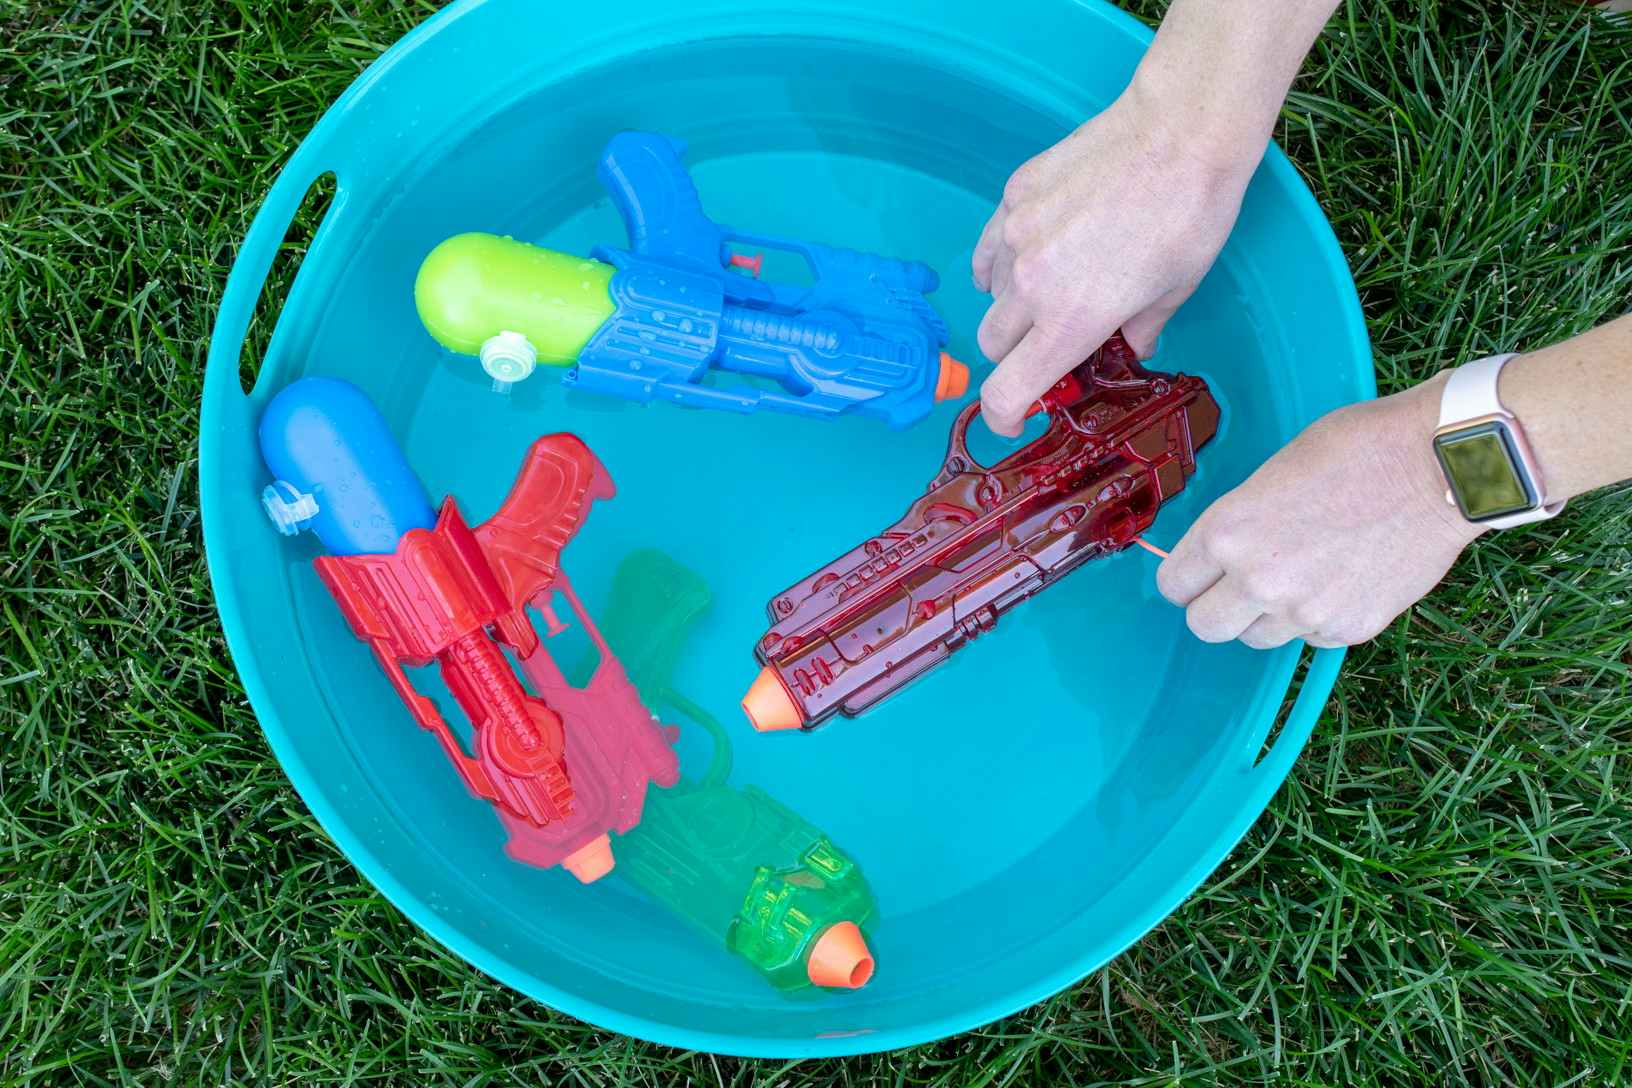 A person's hands reaching to take a water gun from a bucket filled with water and two more water guns.